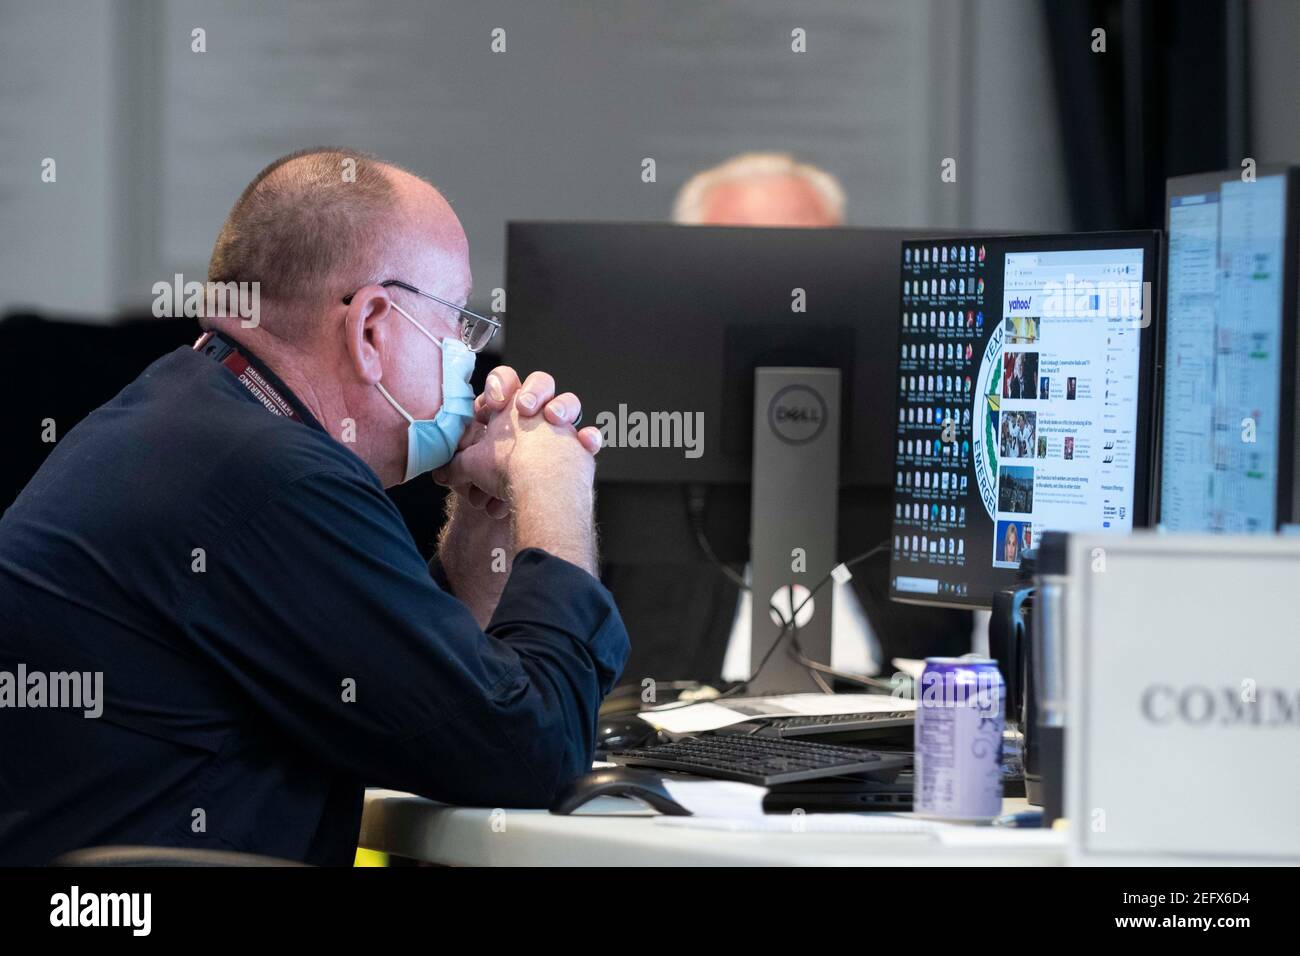 Austin, Texas Feb 17, 2021: Emergency officials confer in the State Operations Center, part of the Texas Division of Emergency Management, while Texas deals with record snow and bitter cold in all 254 counties. About a quarter of the state is still without power as officials deploy state resources on a multitude of fronts. Credit: Bob Daemmrich/Alamy Live News Stock Photo